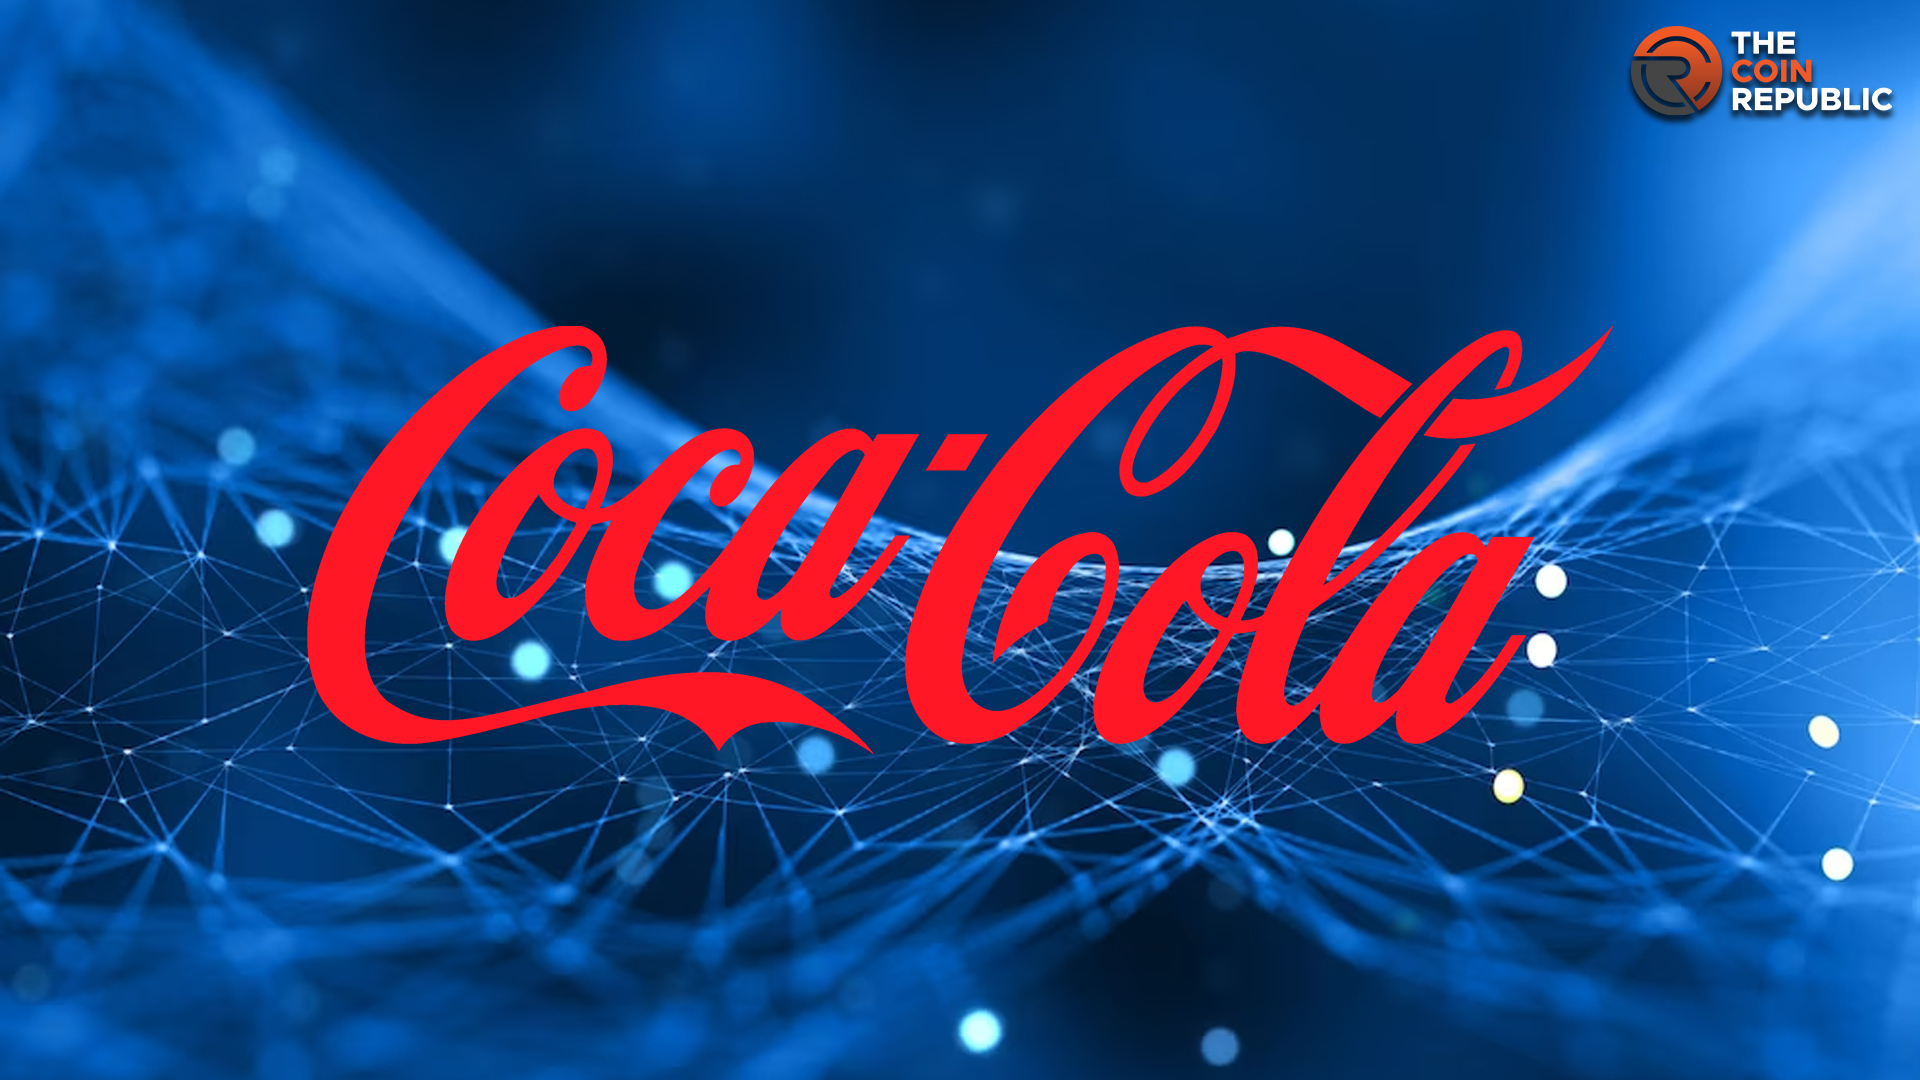 Coca-Cola Stock Slumps 10%: Is it the Right Time to Buy?